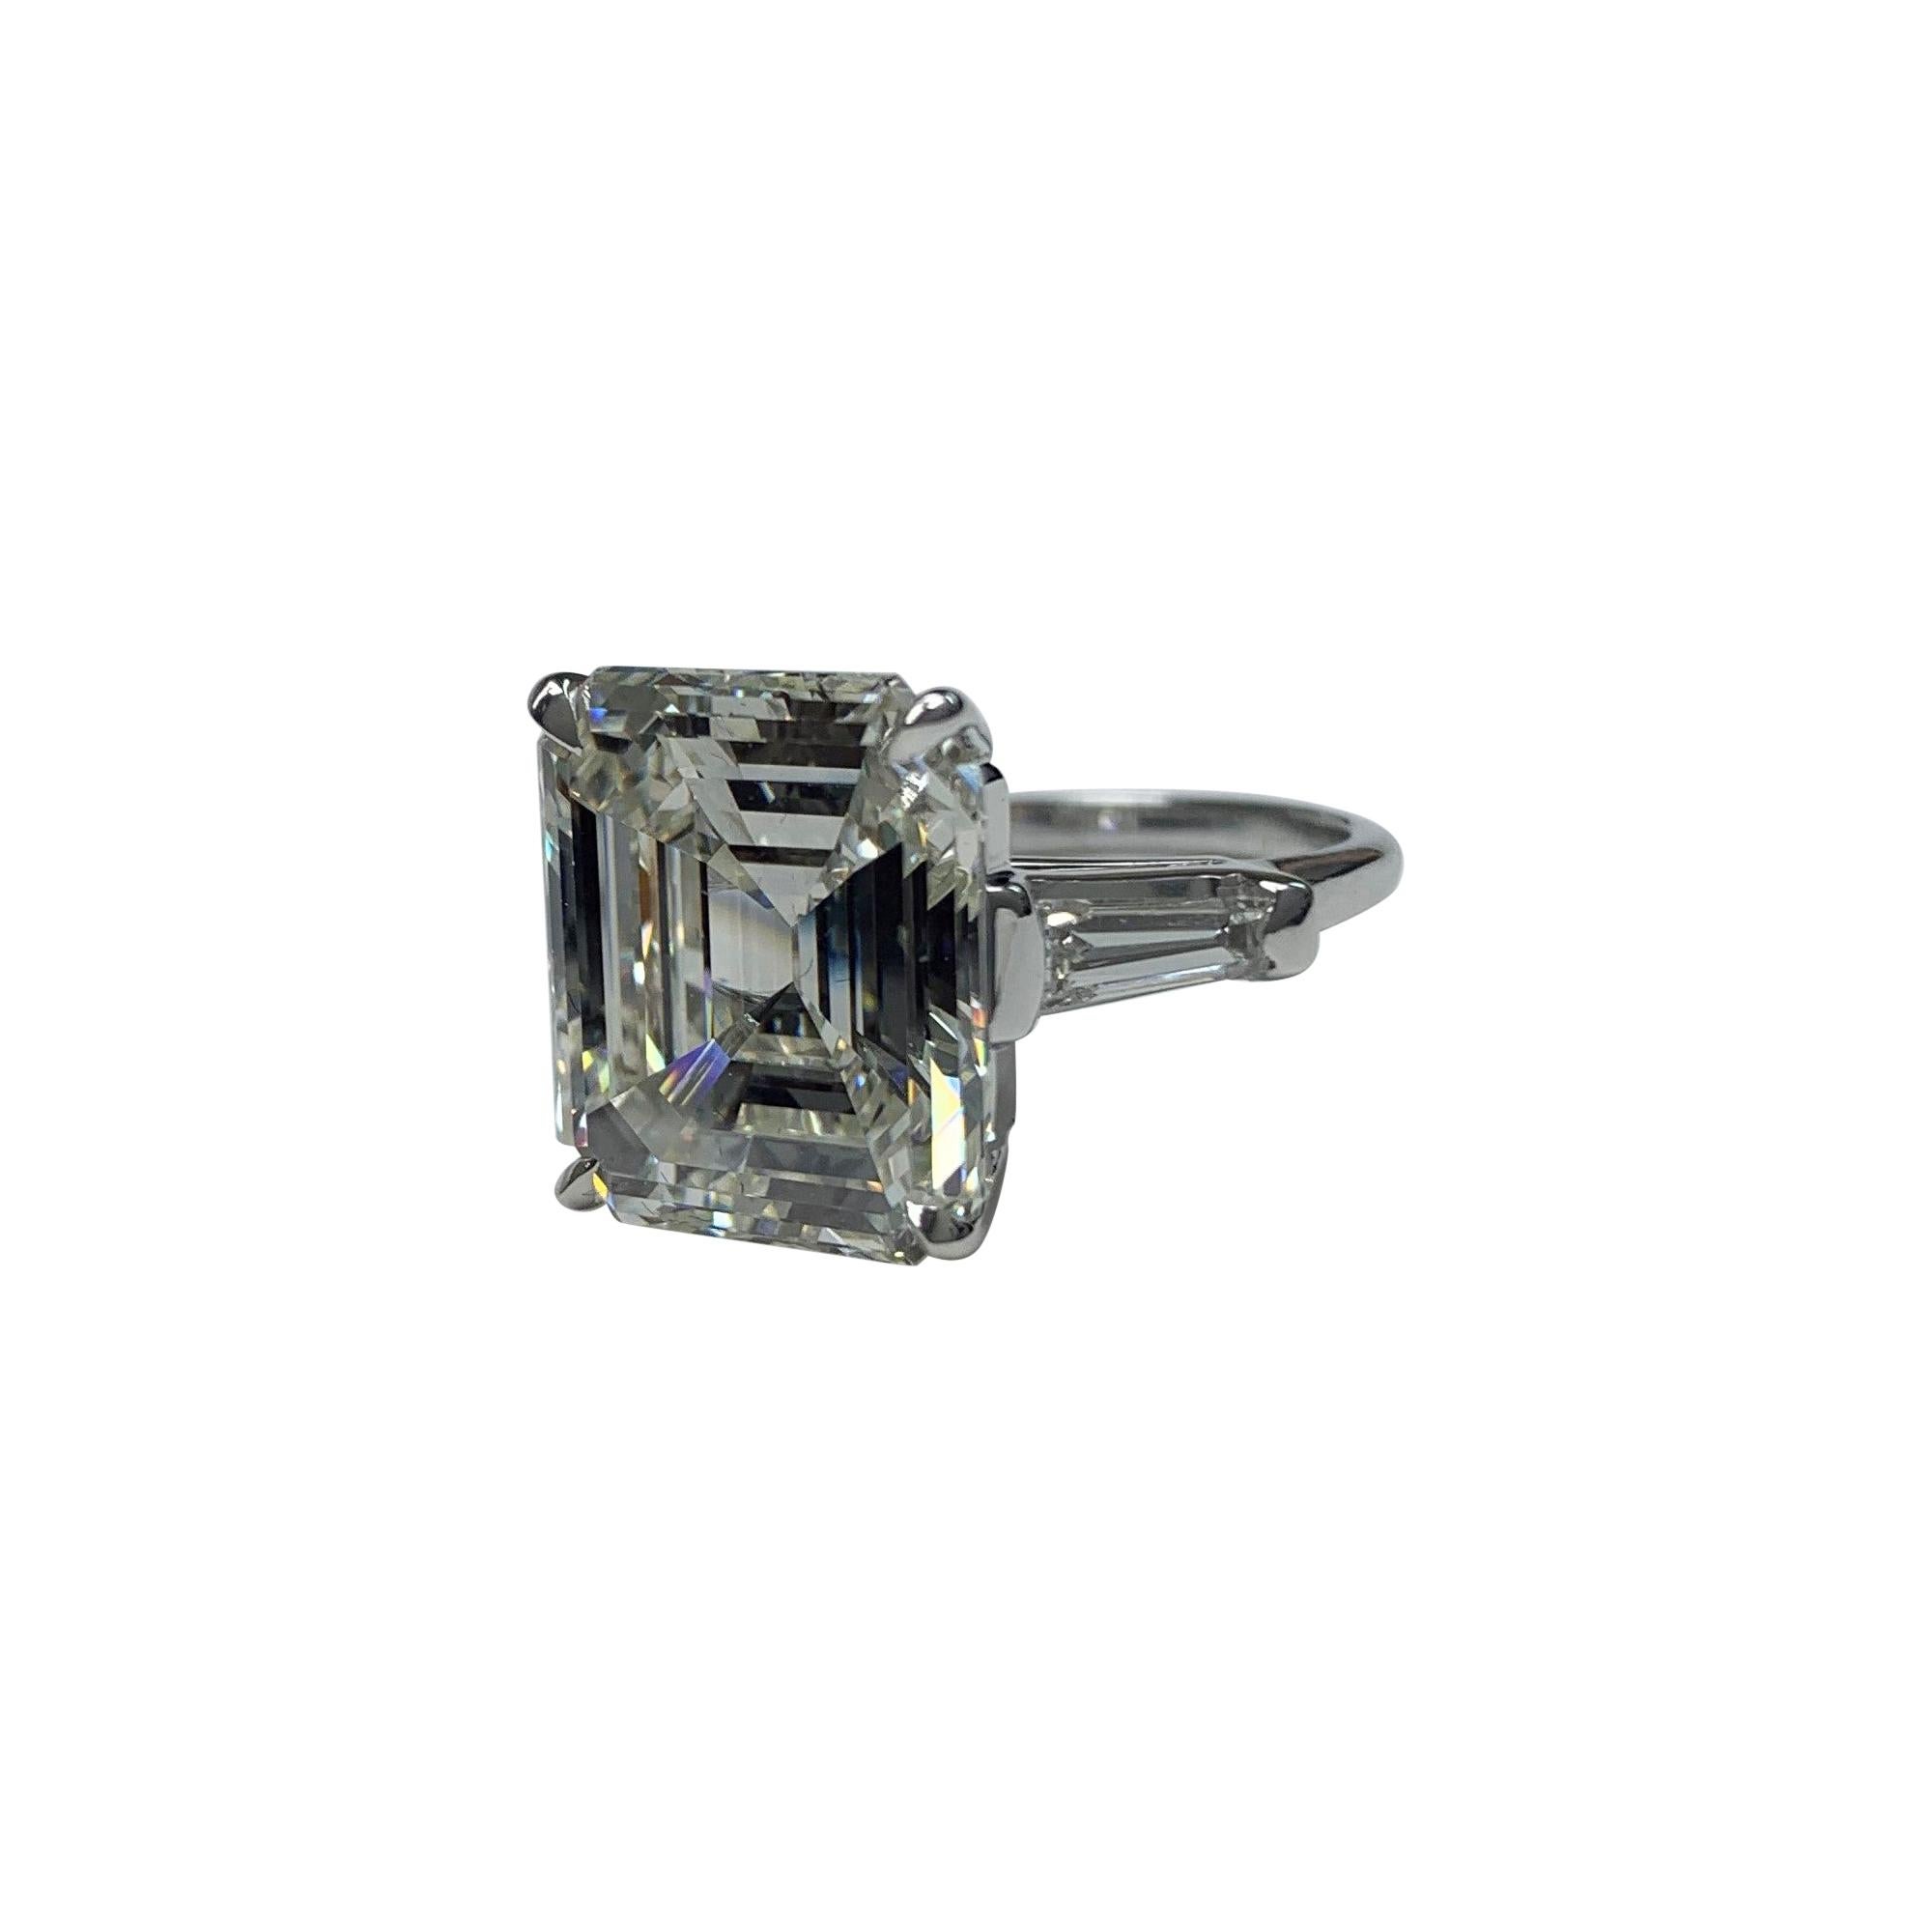 10.18 Carat Emerald Cut Diamond GIA Certified ad J in Color and VS1 in Clarity. GIA Certificate Number 5201414977.
The emerald Cut Diamond is set in the Center of Three Stone Ring with Two Tapered Baguettes on the sides. The Baguettes are aprox.